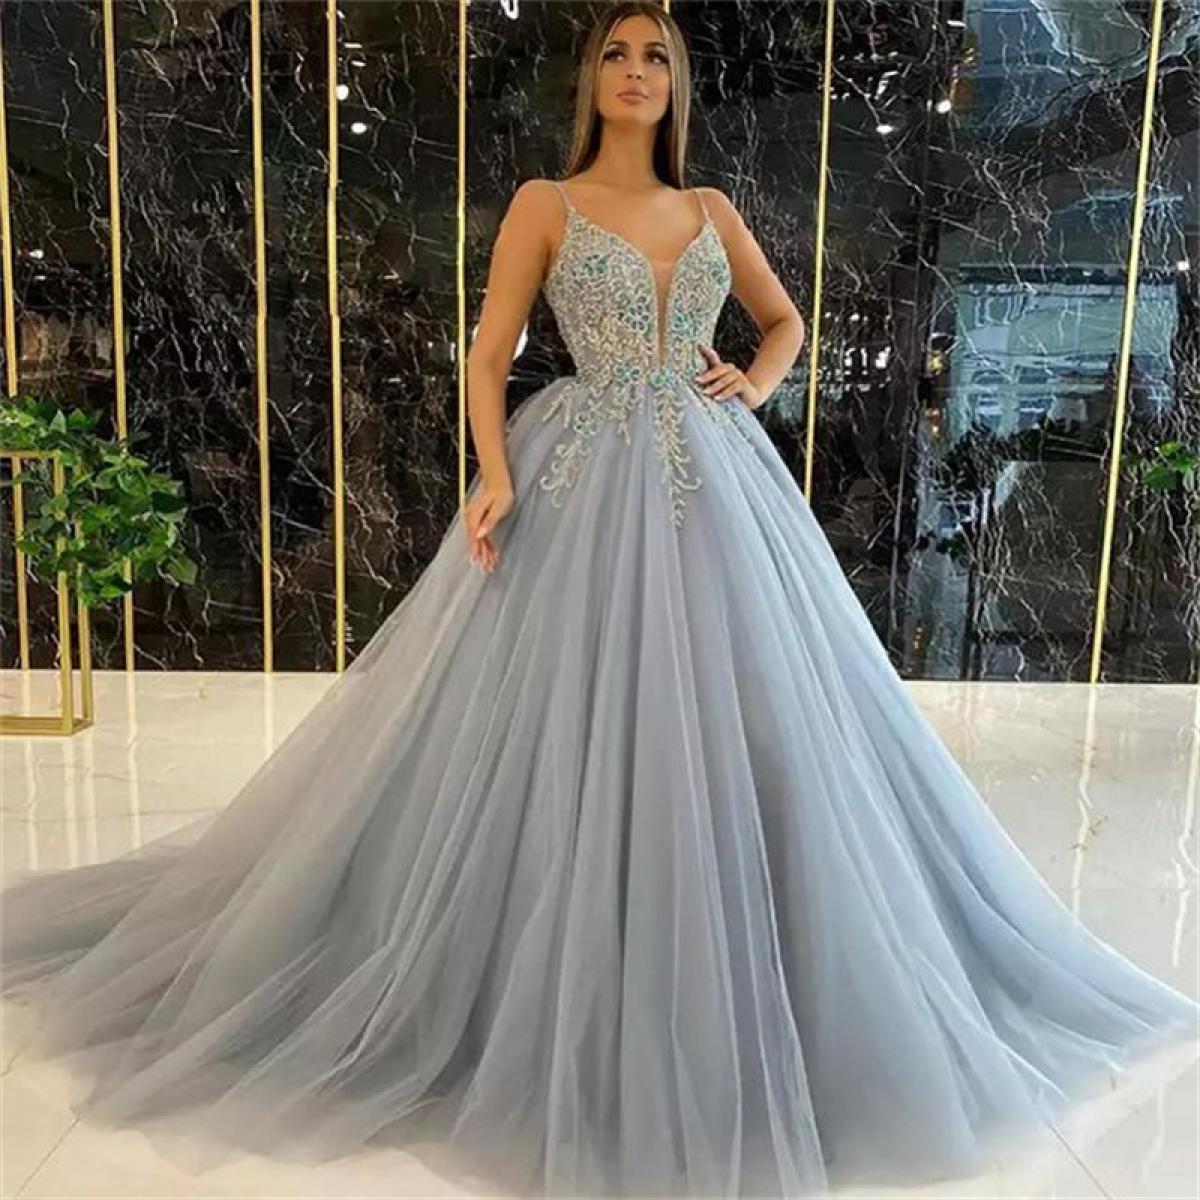 Luxury Sparkly Beads Sequins Lace Evening Dresses Gowns Robe De Soiree  Spaghetti Straps Ball Gown Soft Tulle Party Dres